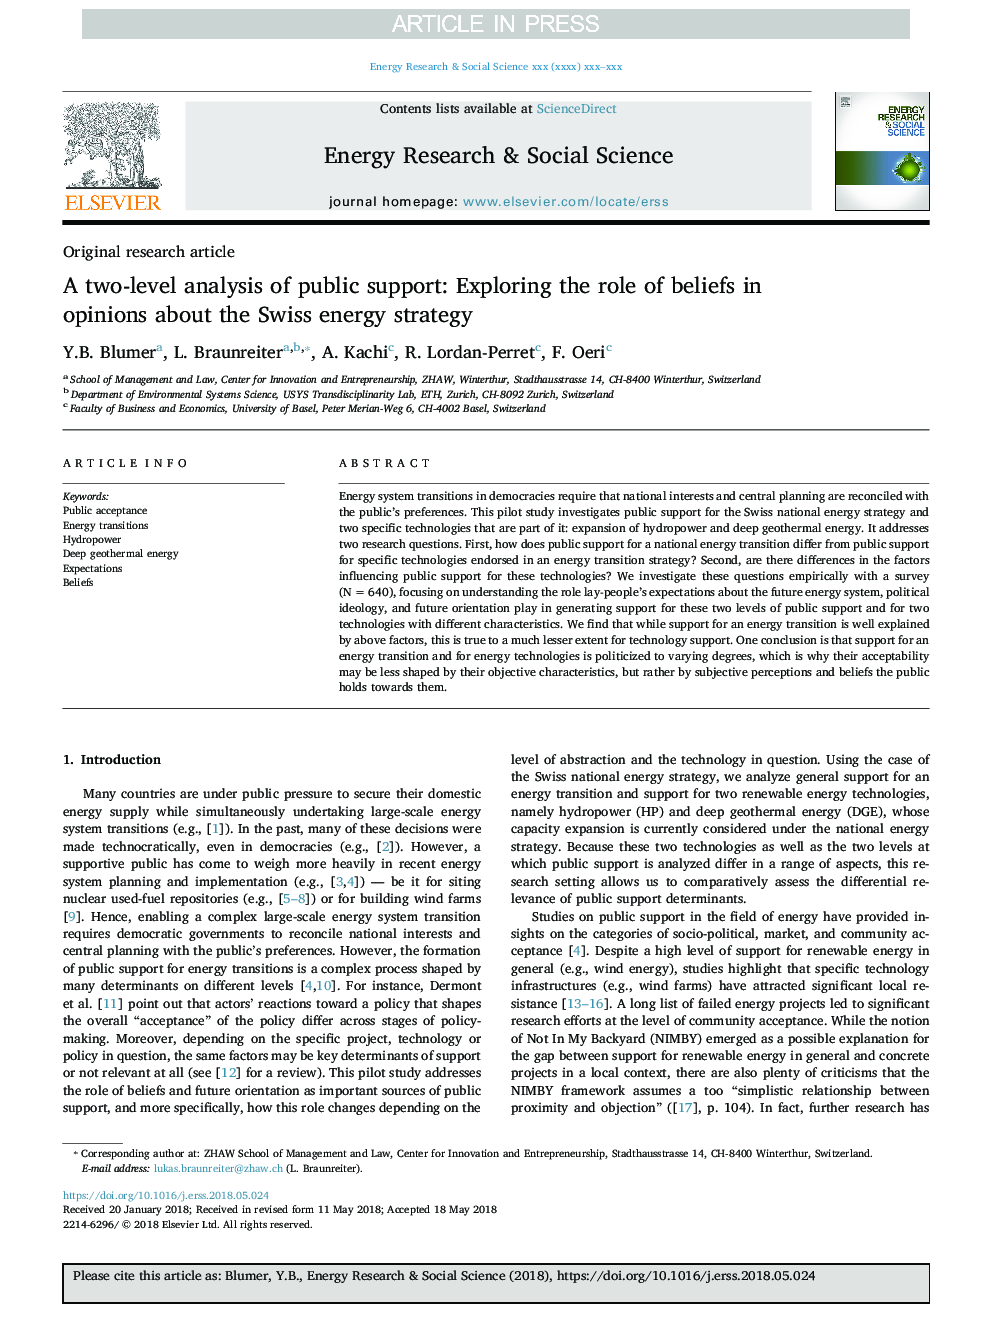 A two-level analysis of public support: Exploring the role of beliefs in opinions about the Swiss energy strategy